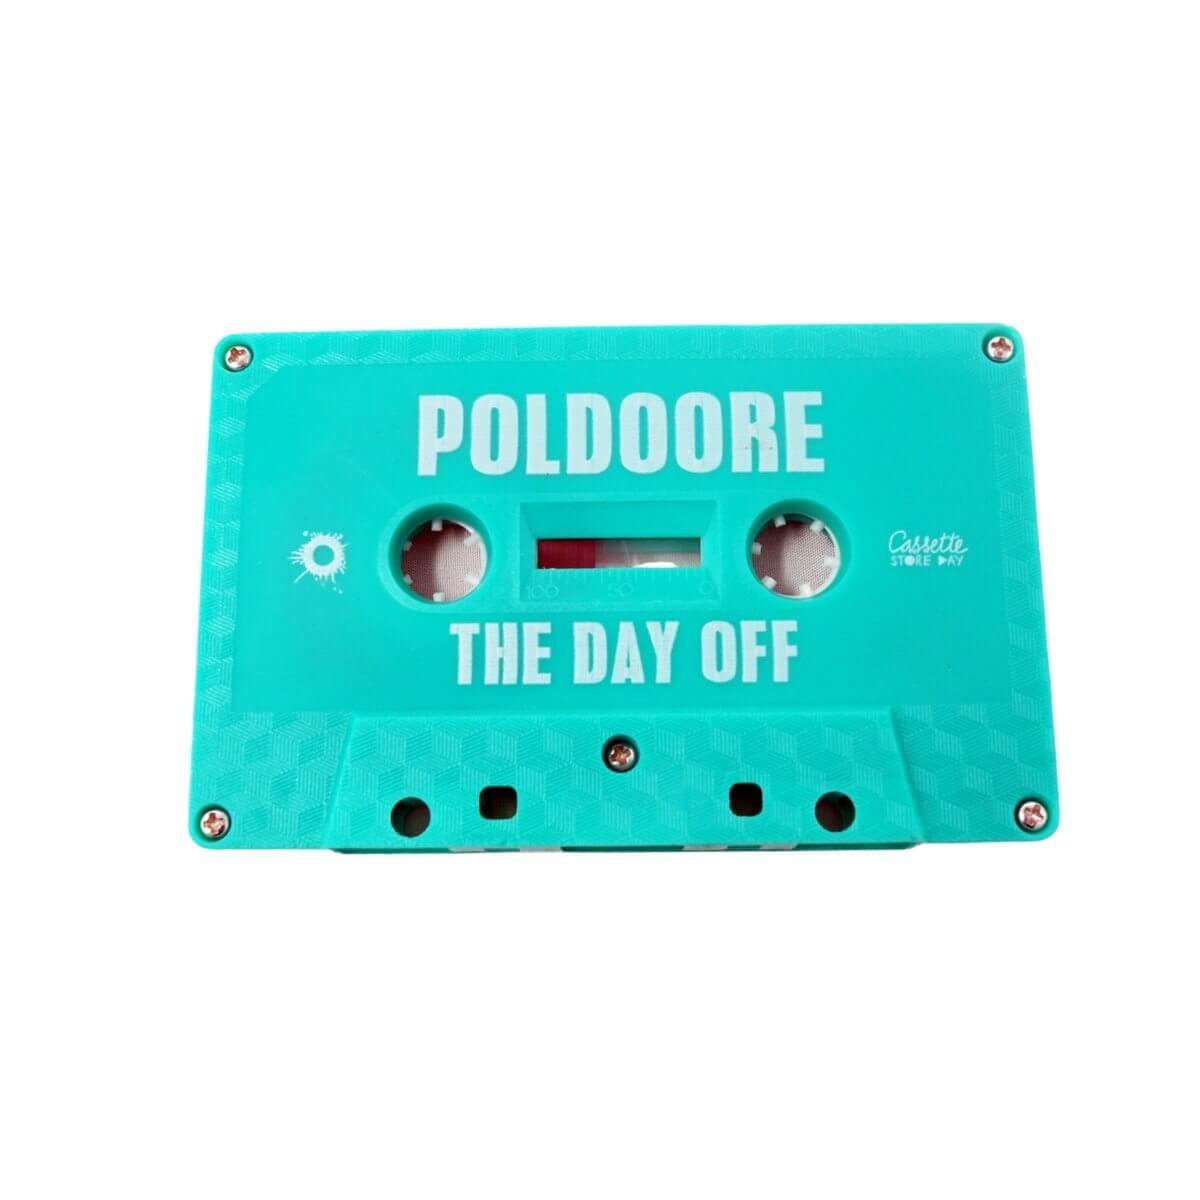 Poldoore - The Day Off - Limited Edition Cassette (CSD 2017) - Cold Busted